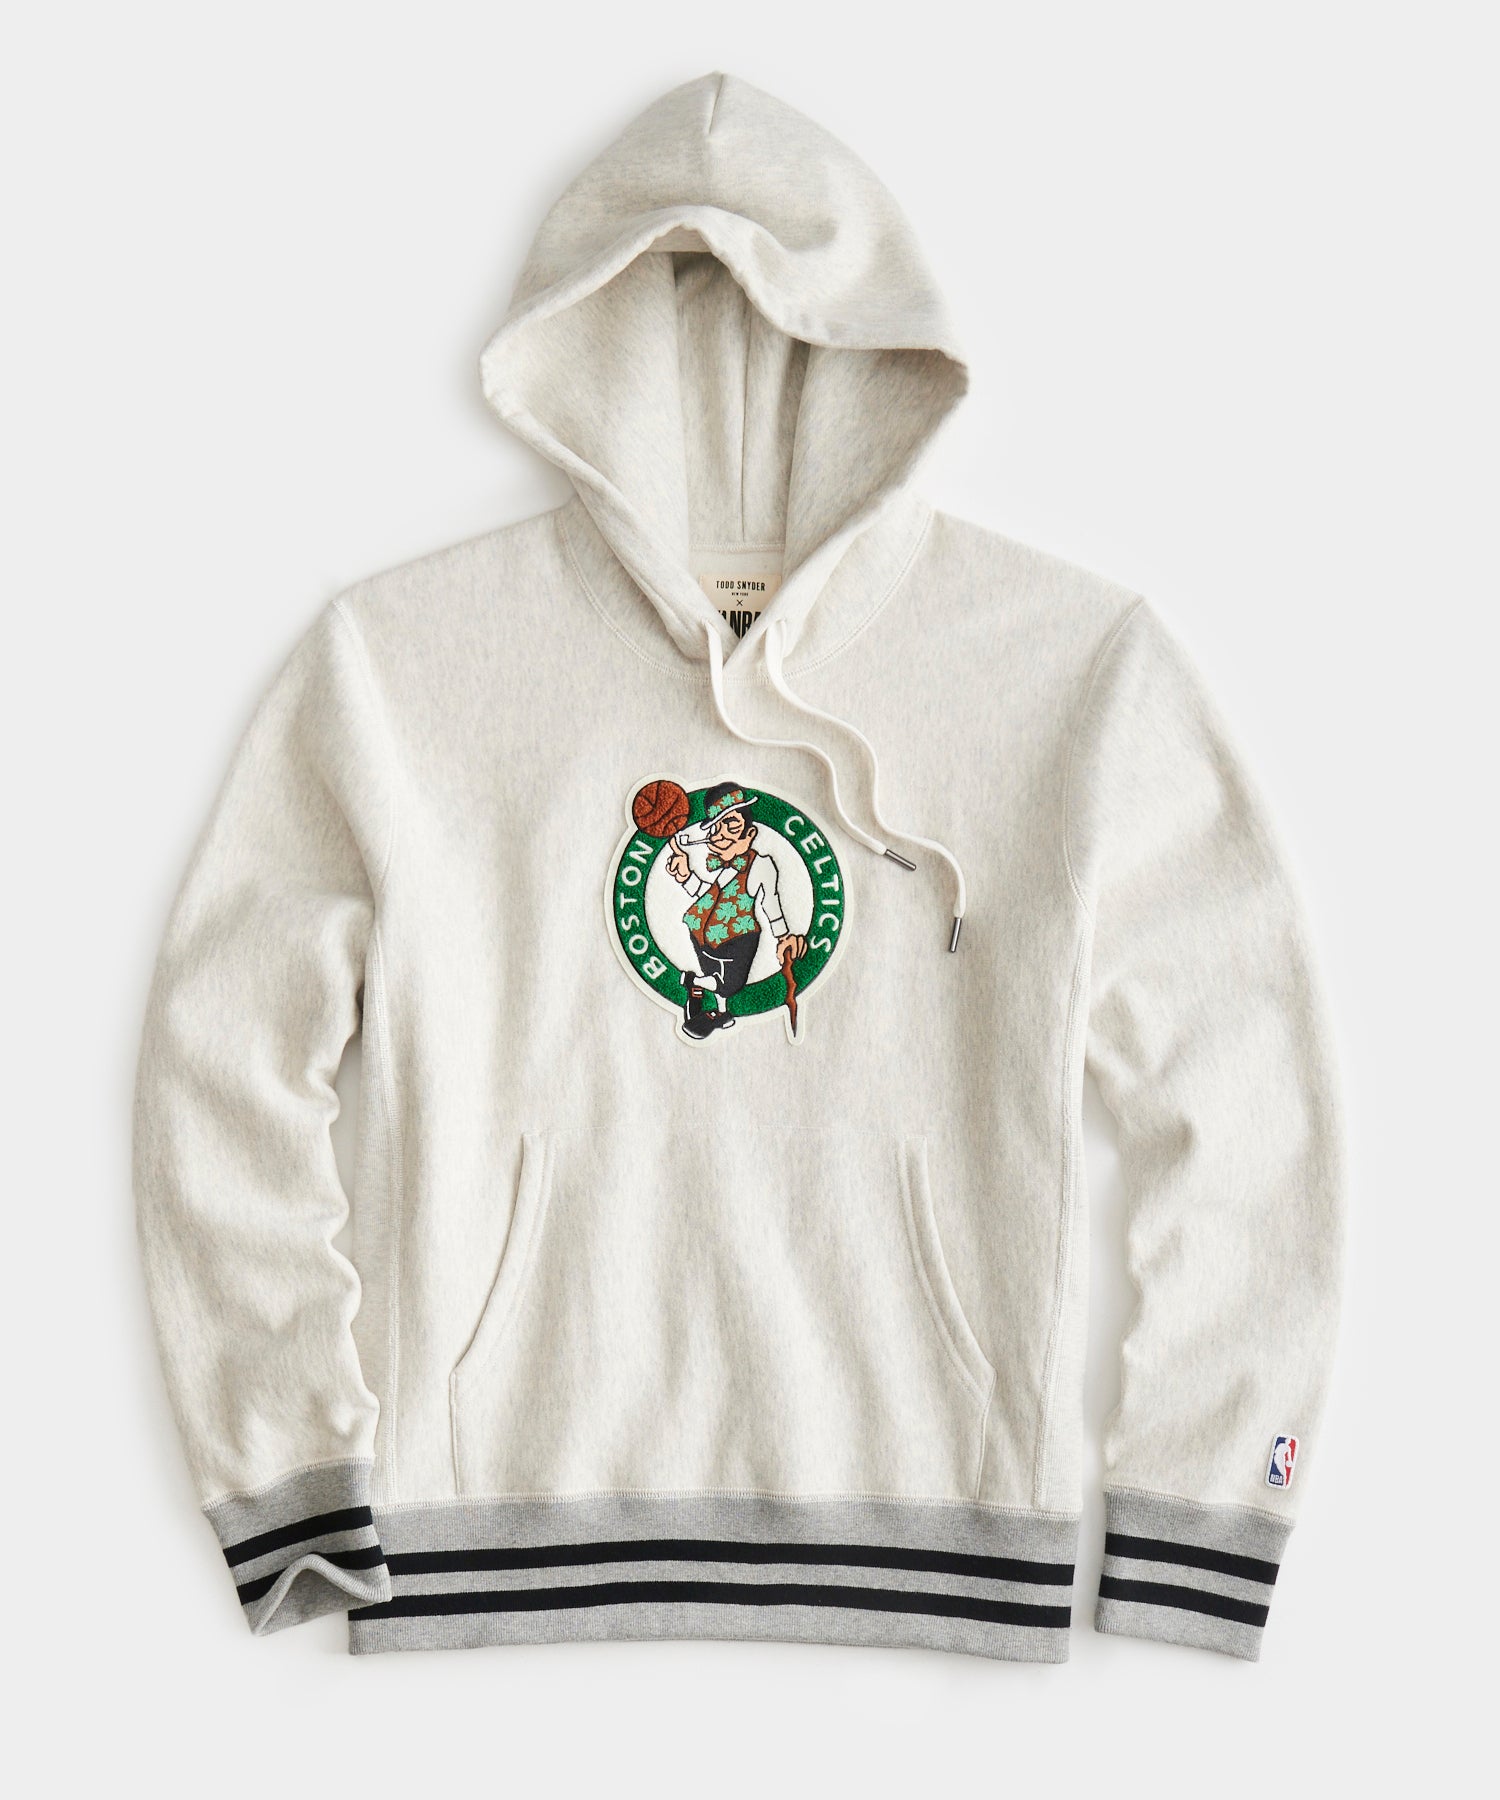 Champion NBA Sweaters for sale